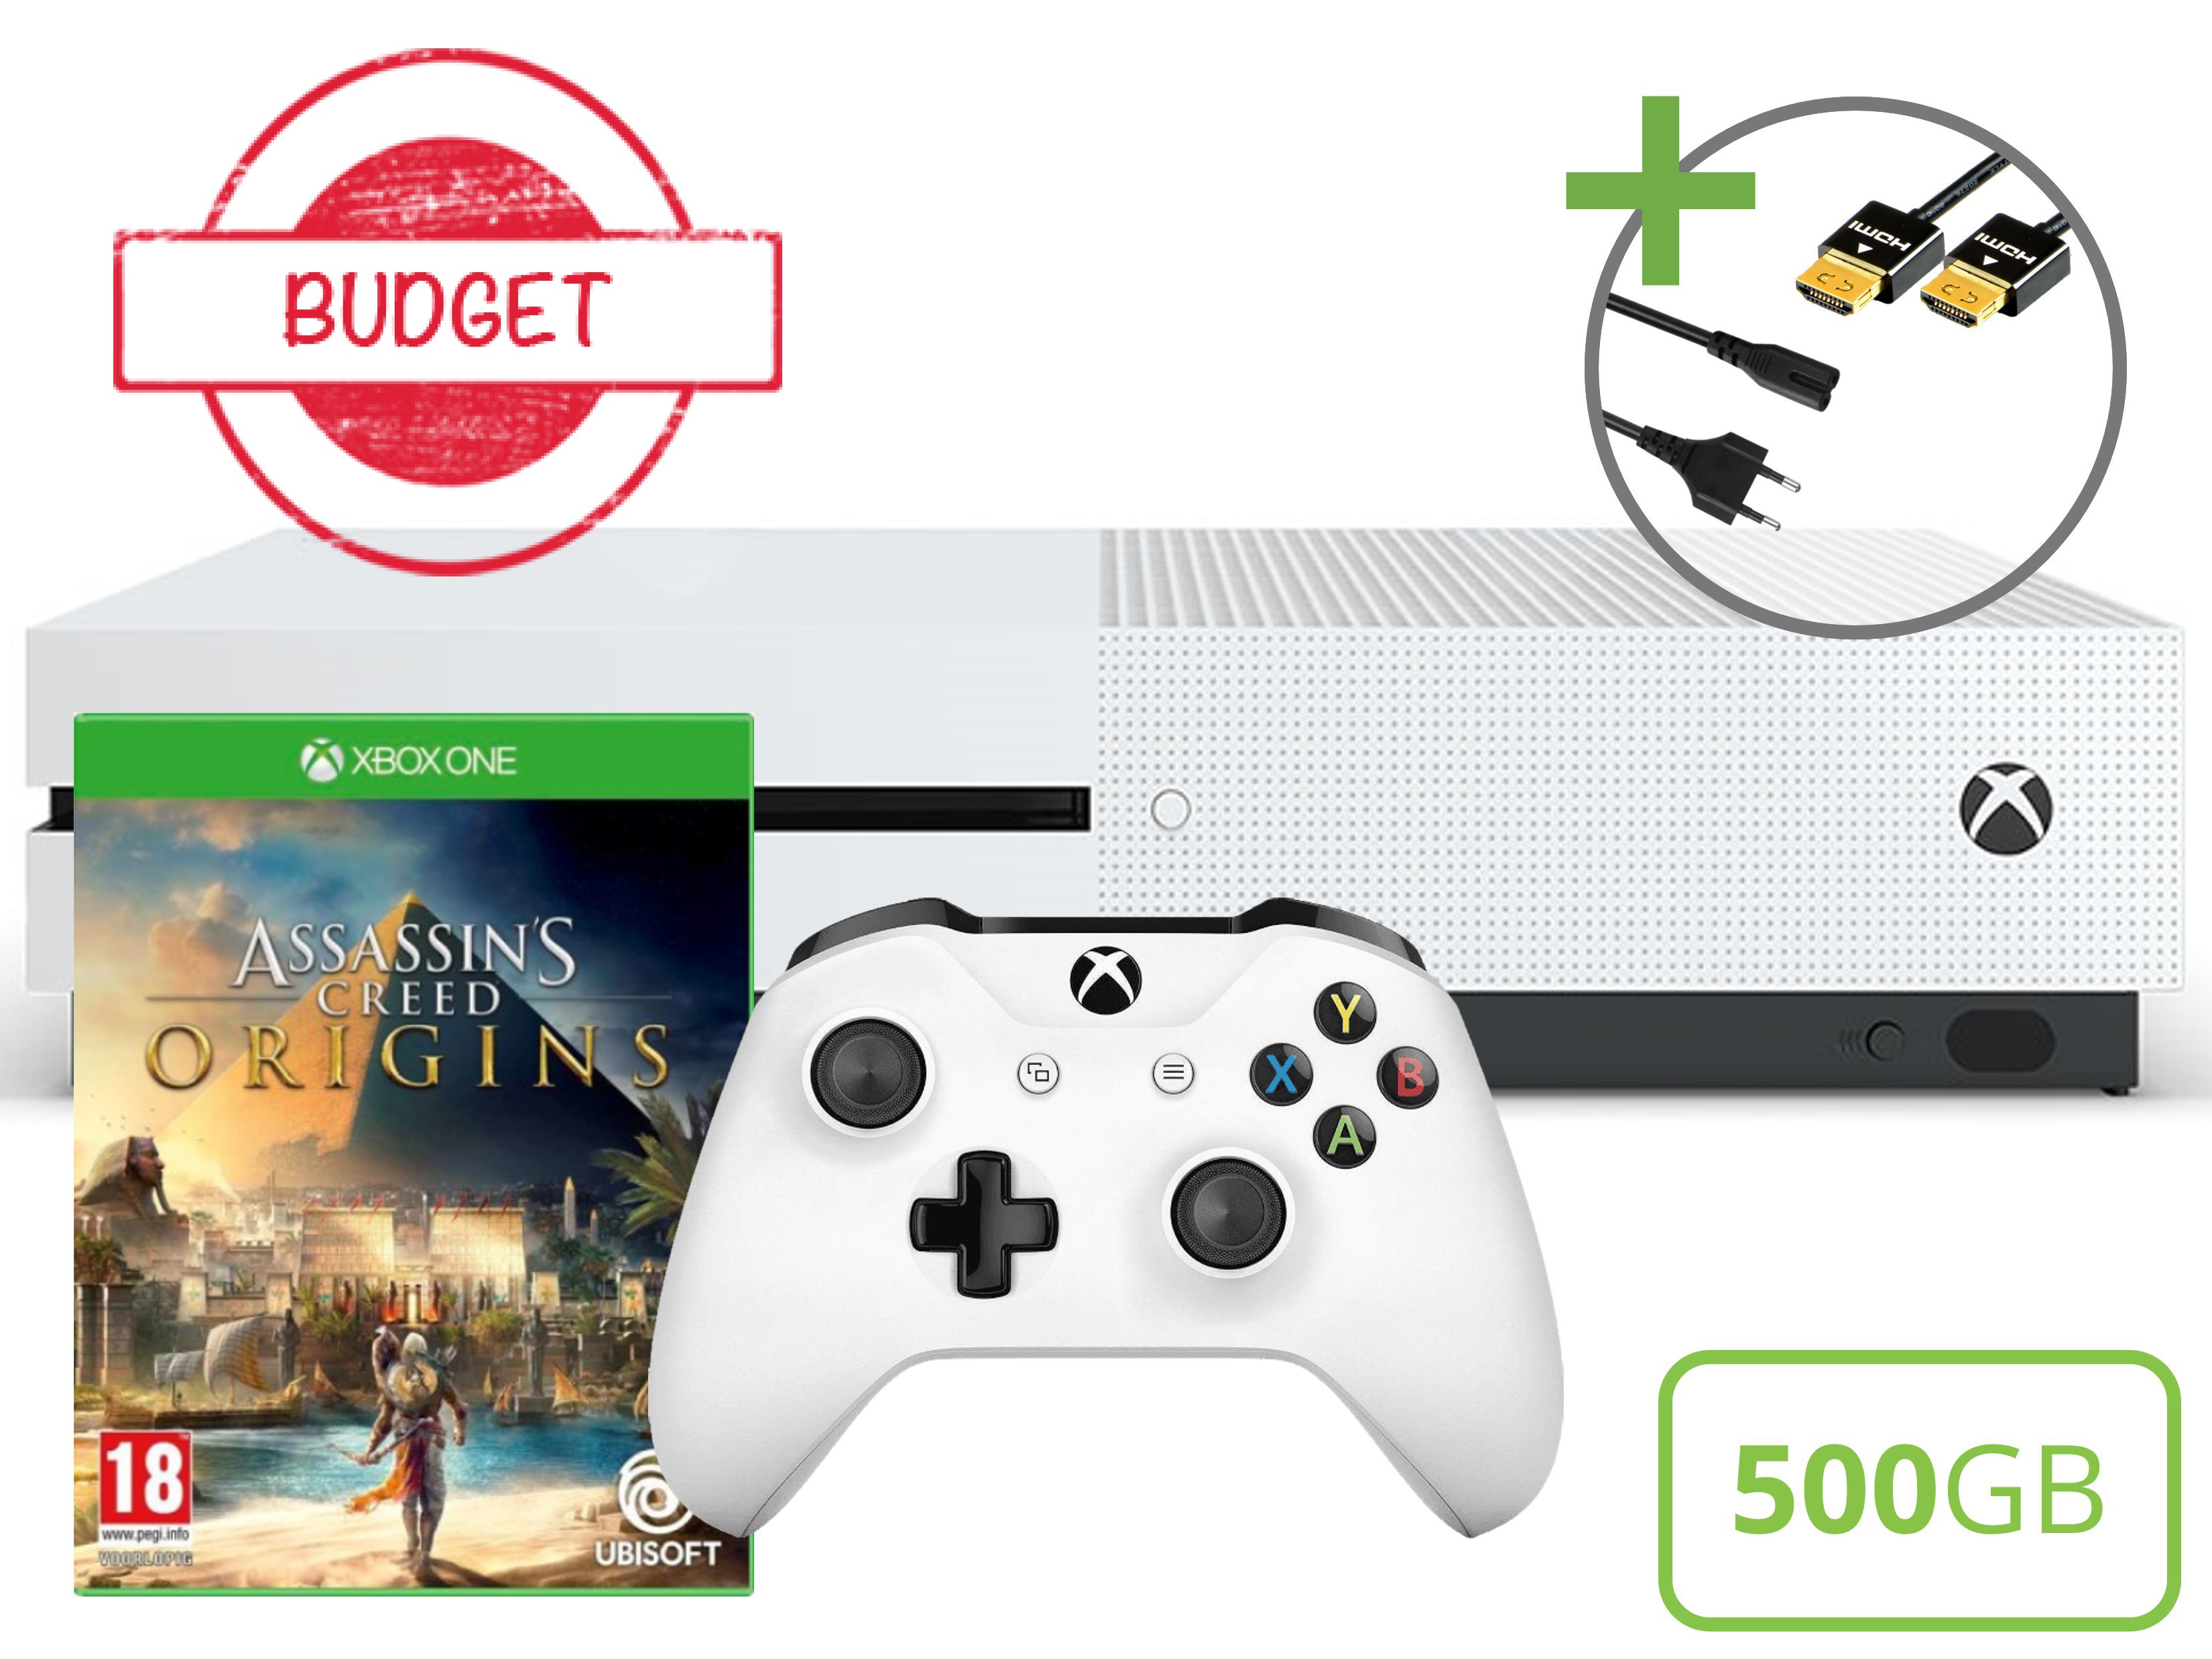 Microsoft Xbox One S Starter Pack - 500GB Assassin's Creed Origins Edition - Budget - Xbox One Hardware